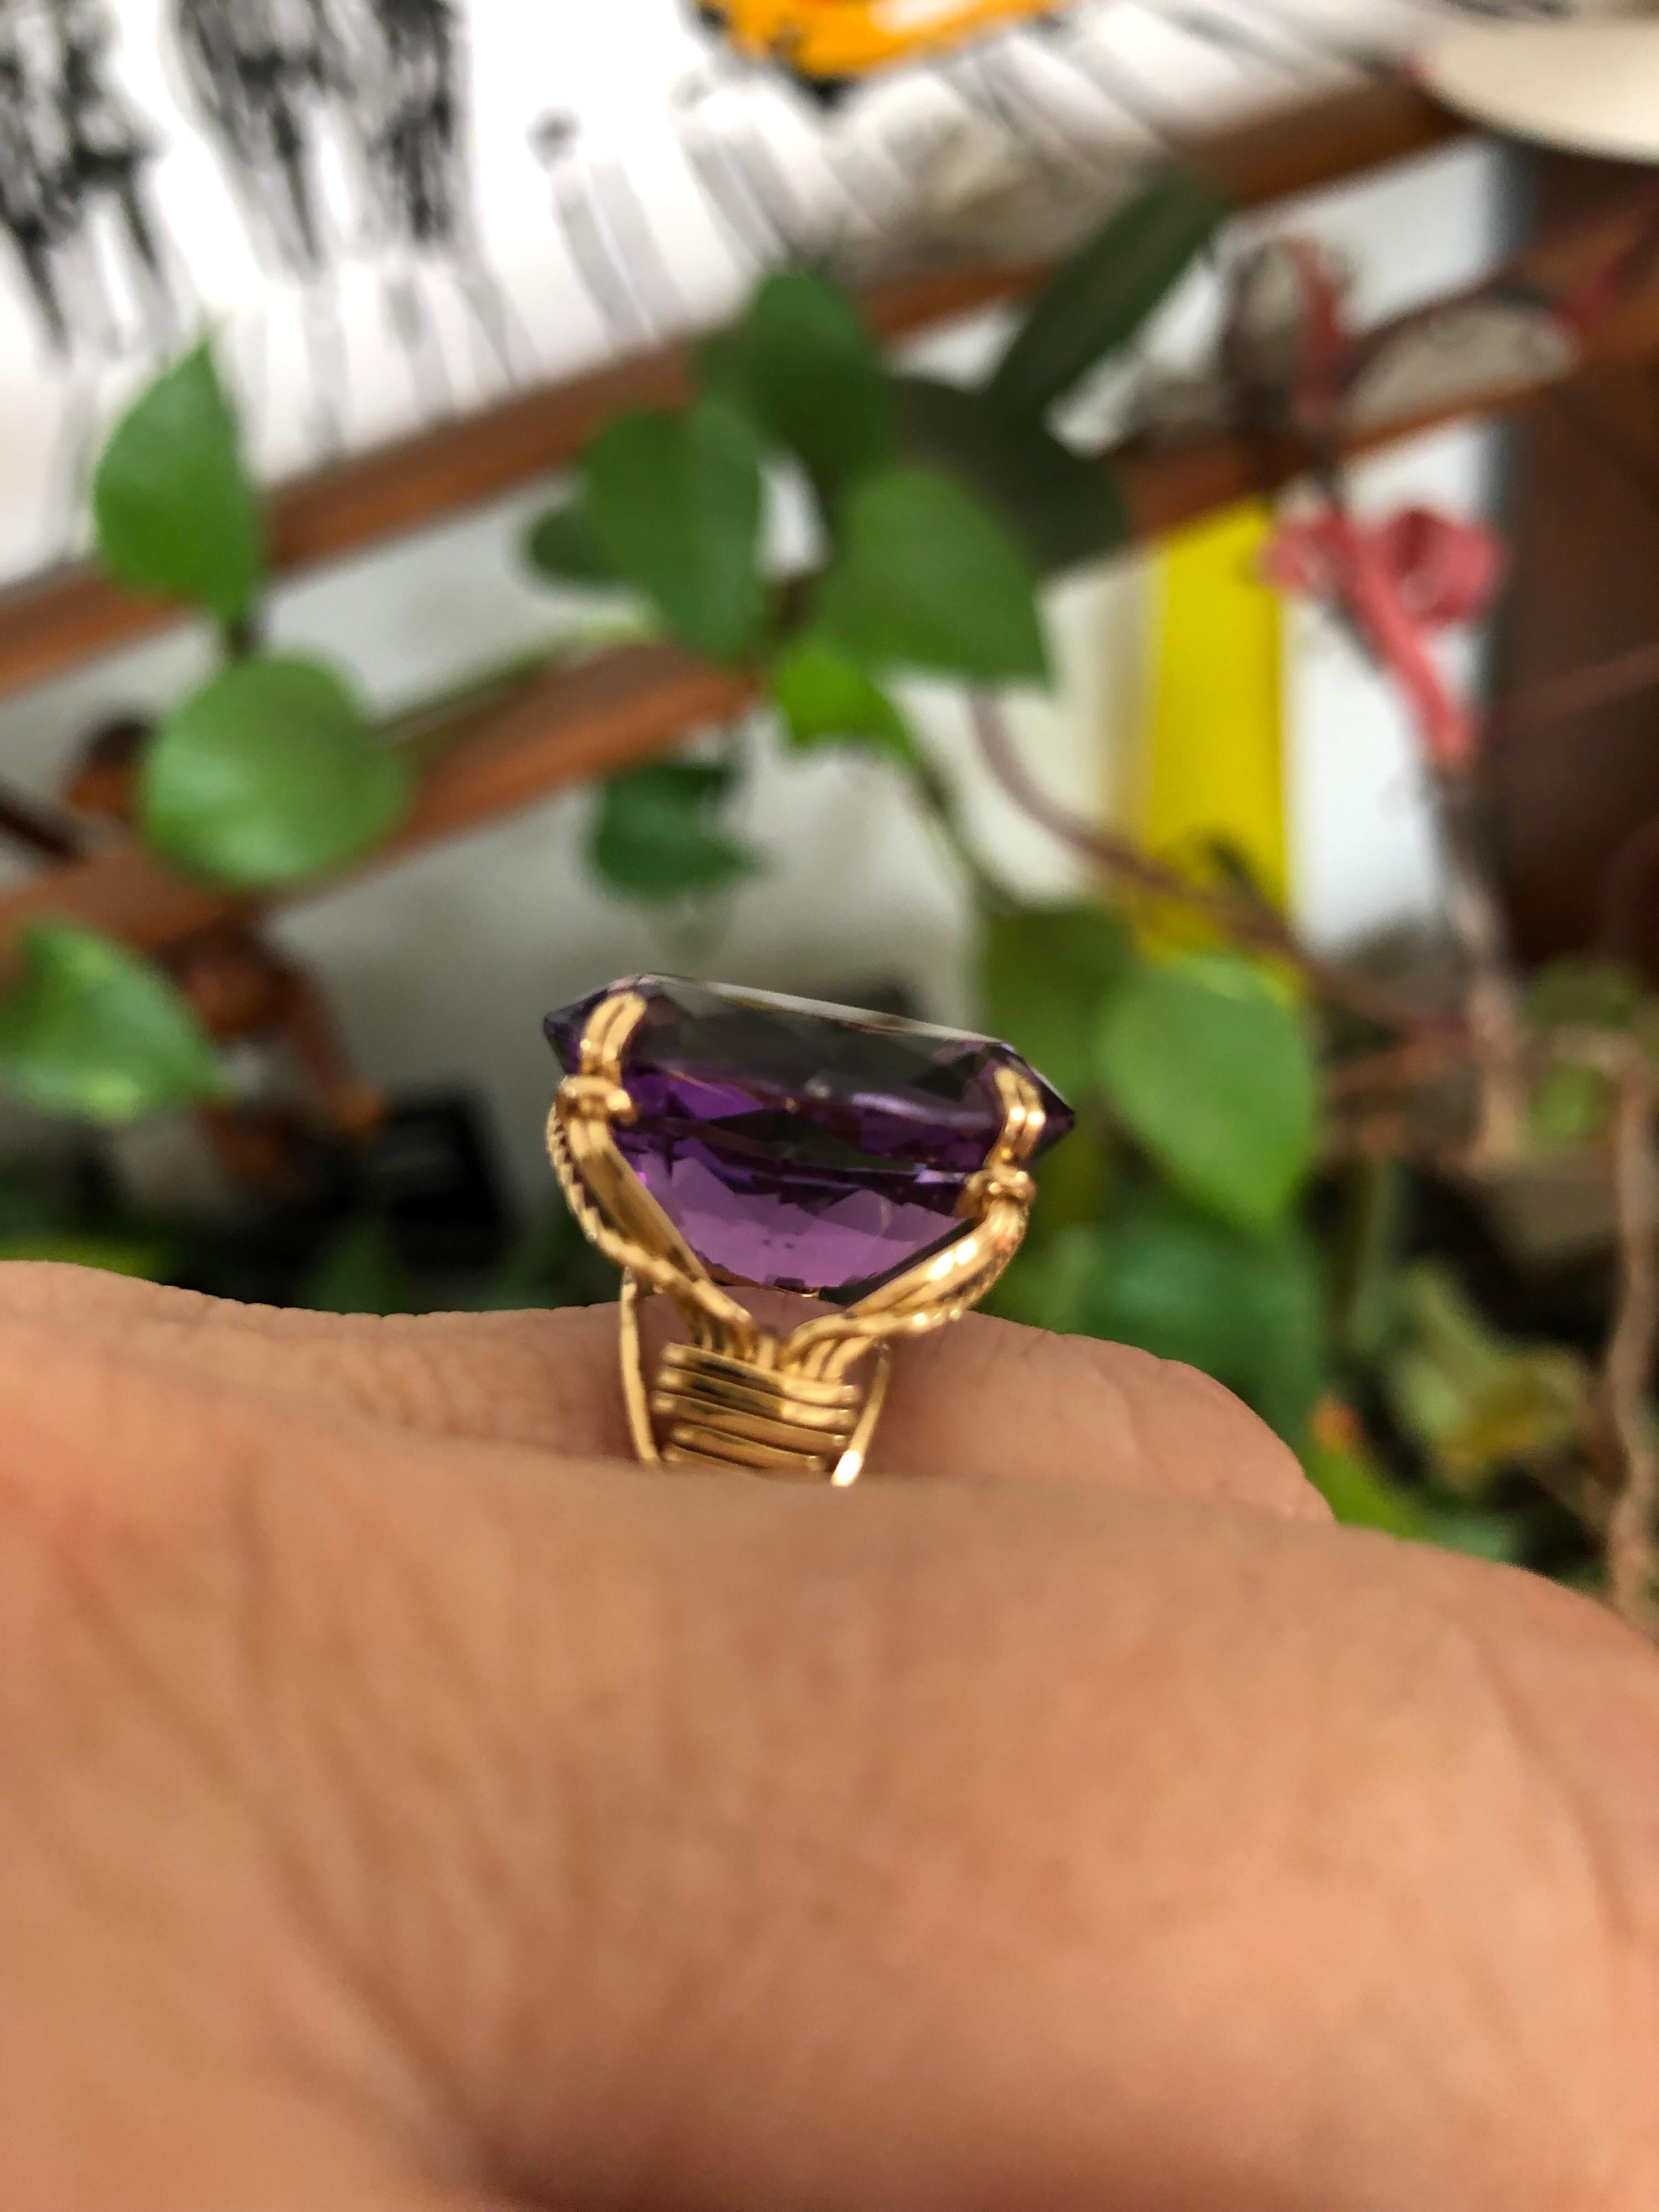 14 Karat Gold 17.25 Carat Amethyst Ring In Good Condition For Sale In Wallkill, NY